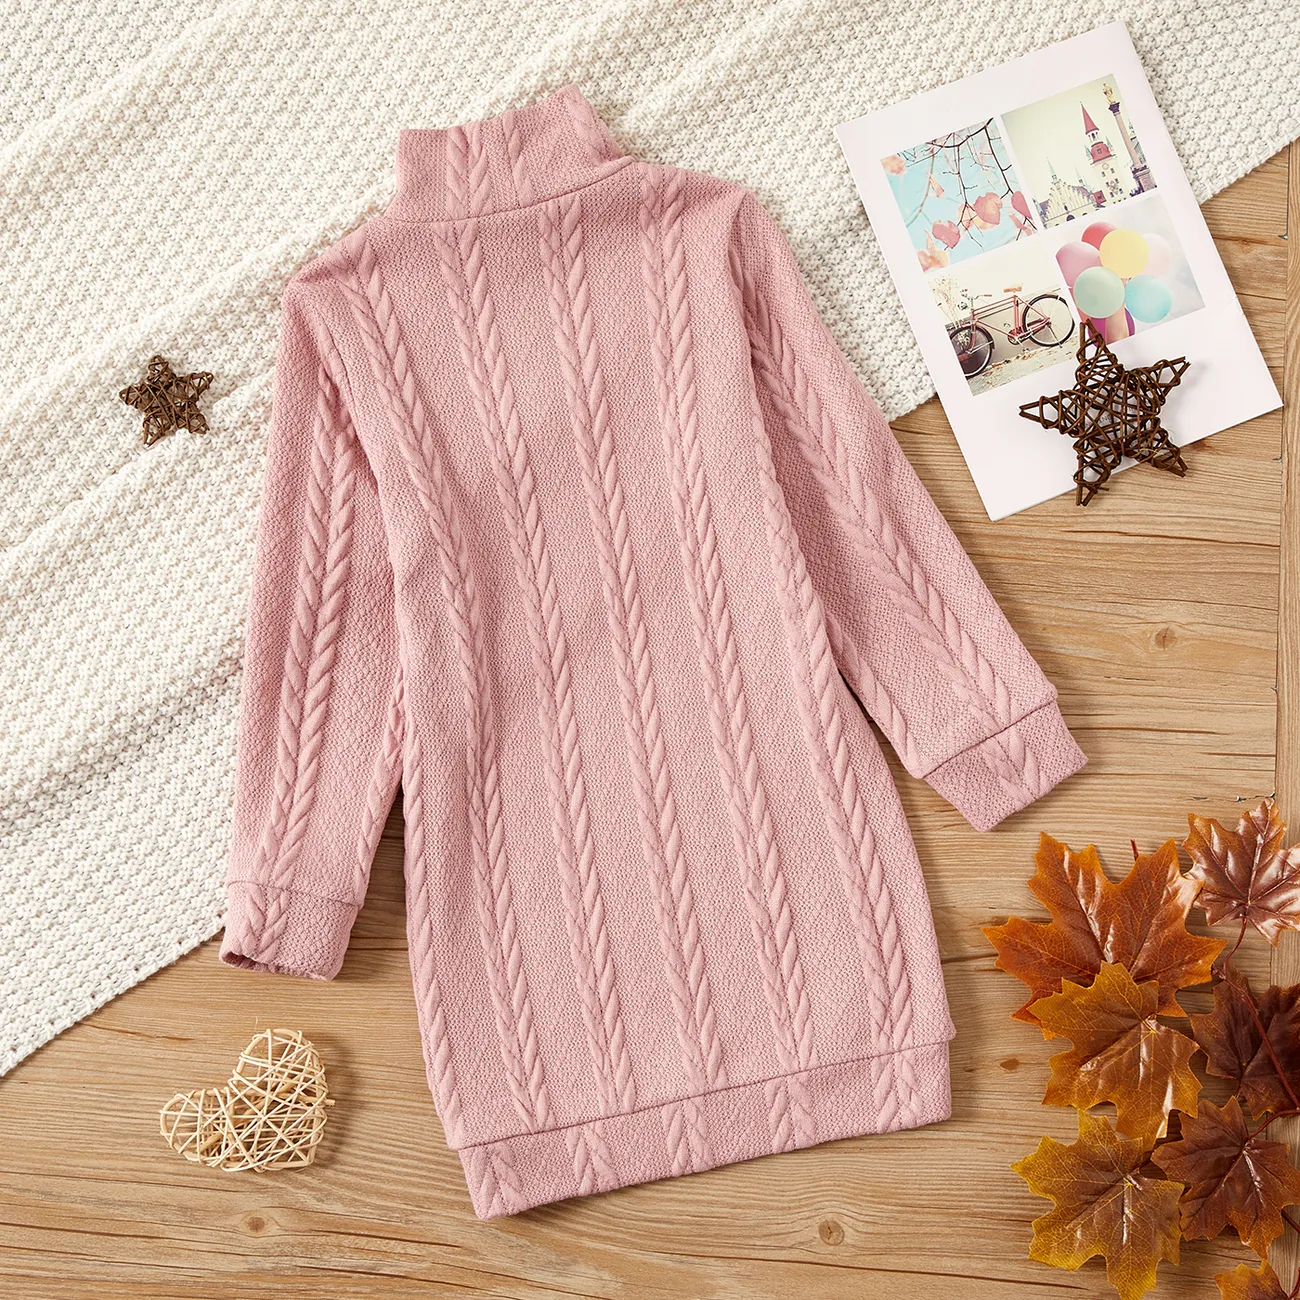 Kid Girl Solid Color Cable Knit Textured Mock neck Sweater Dress Pink big image 1